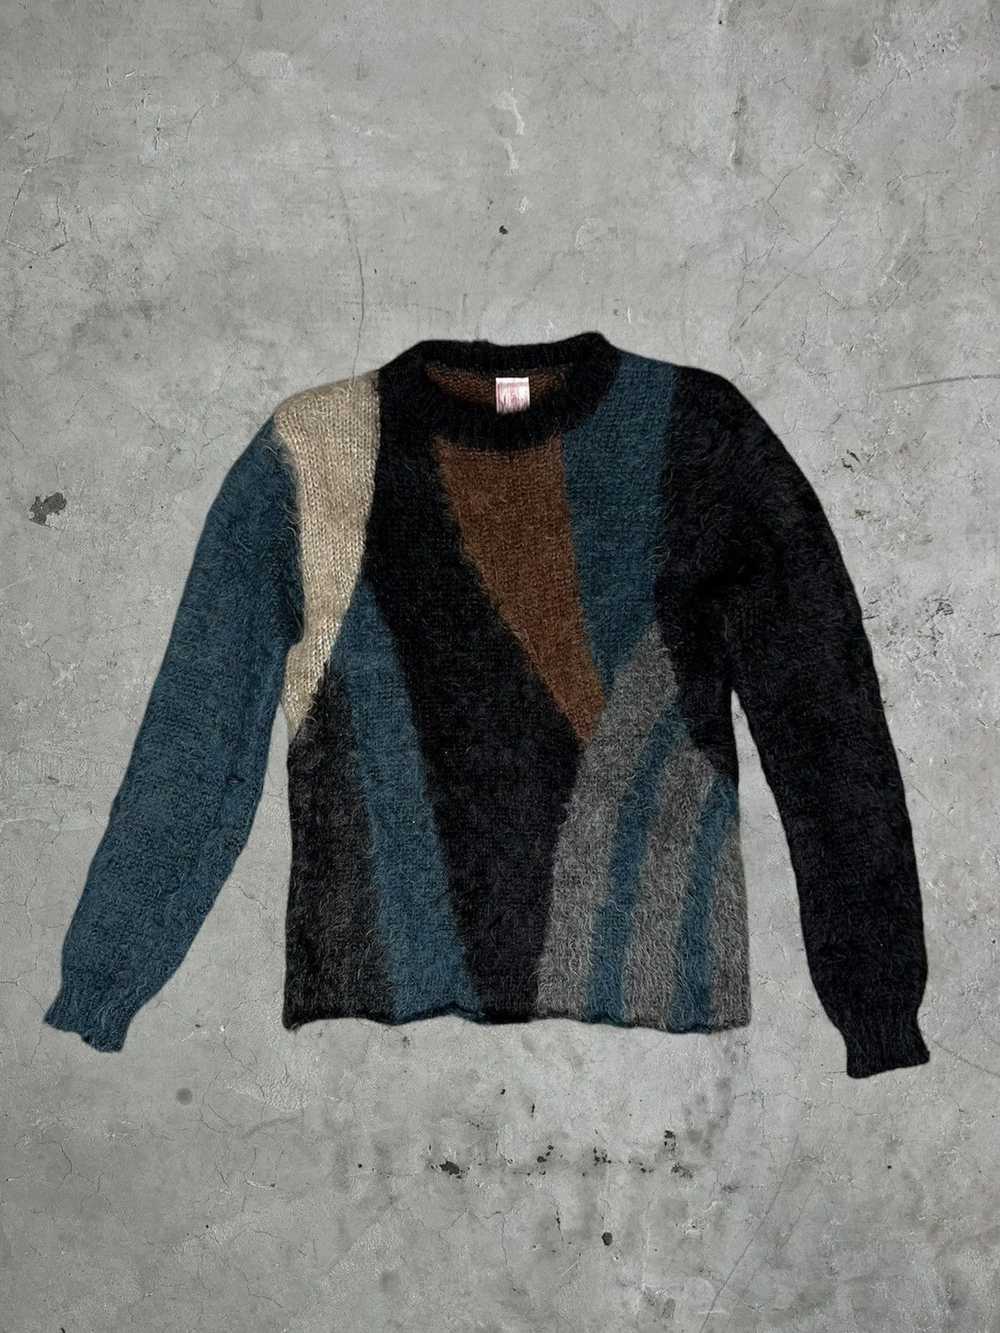 Undercover AW/02 Undercover Mohair Sweater - image 1